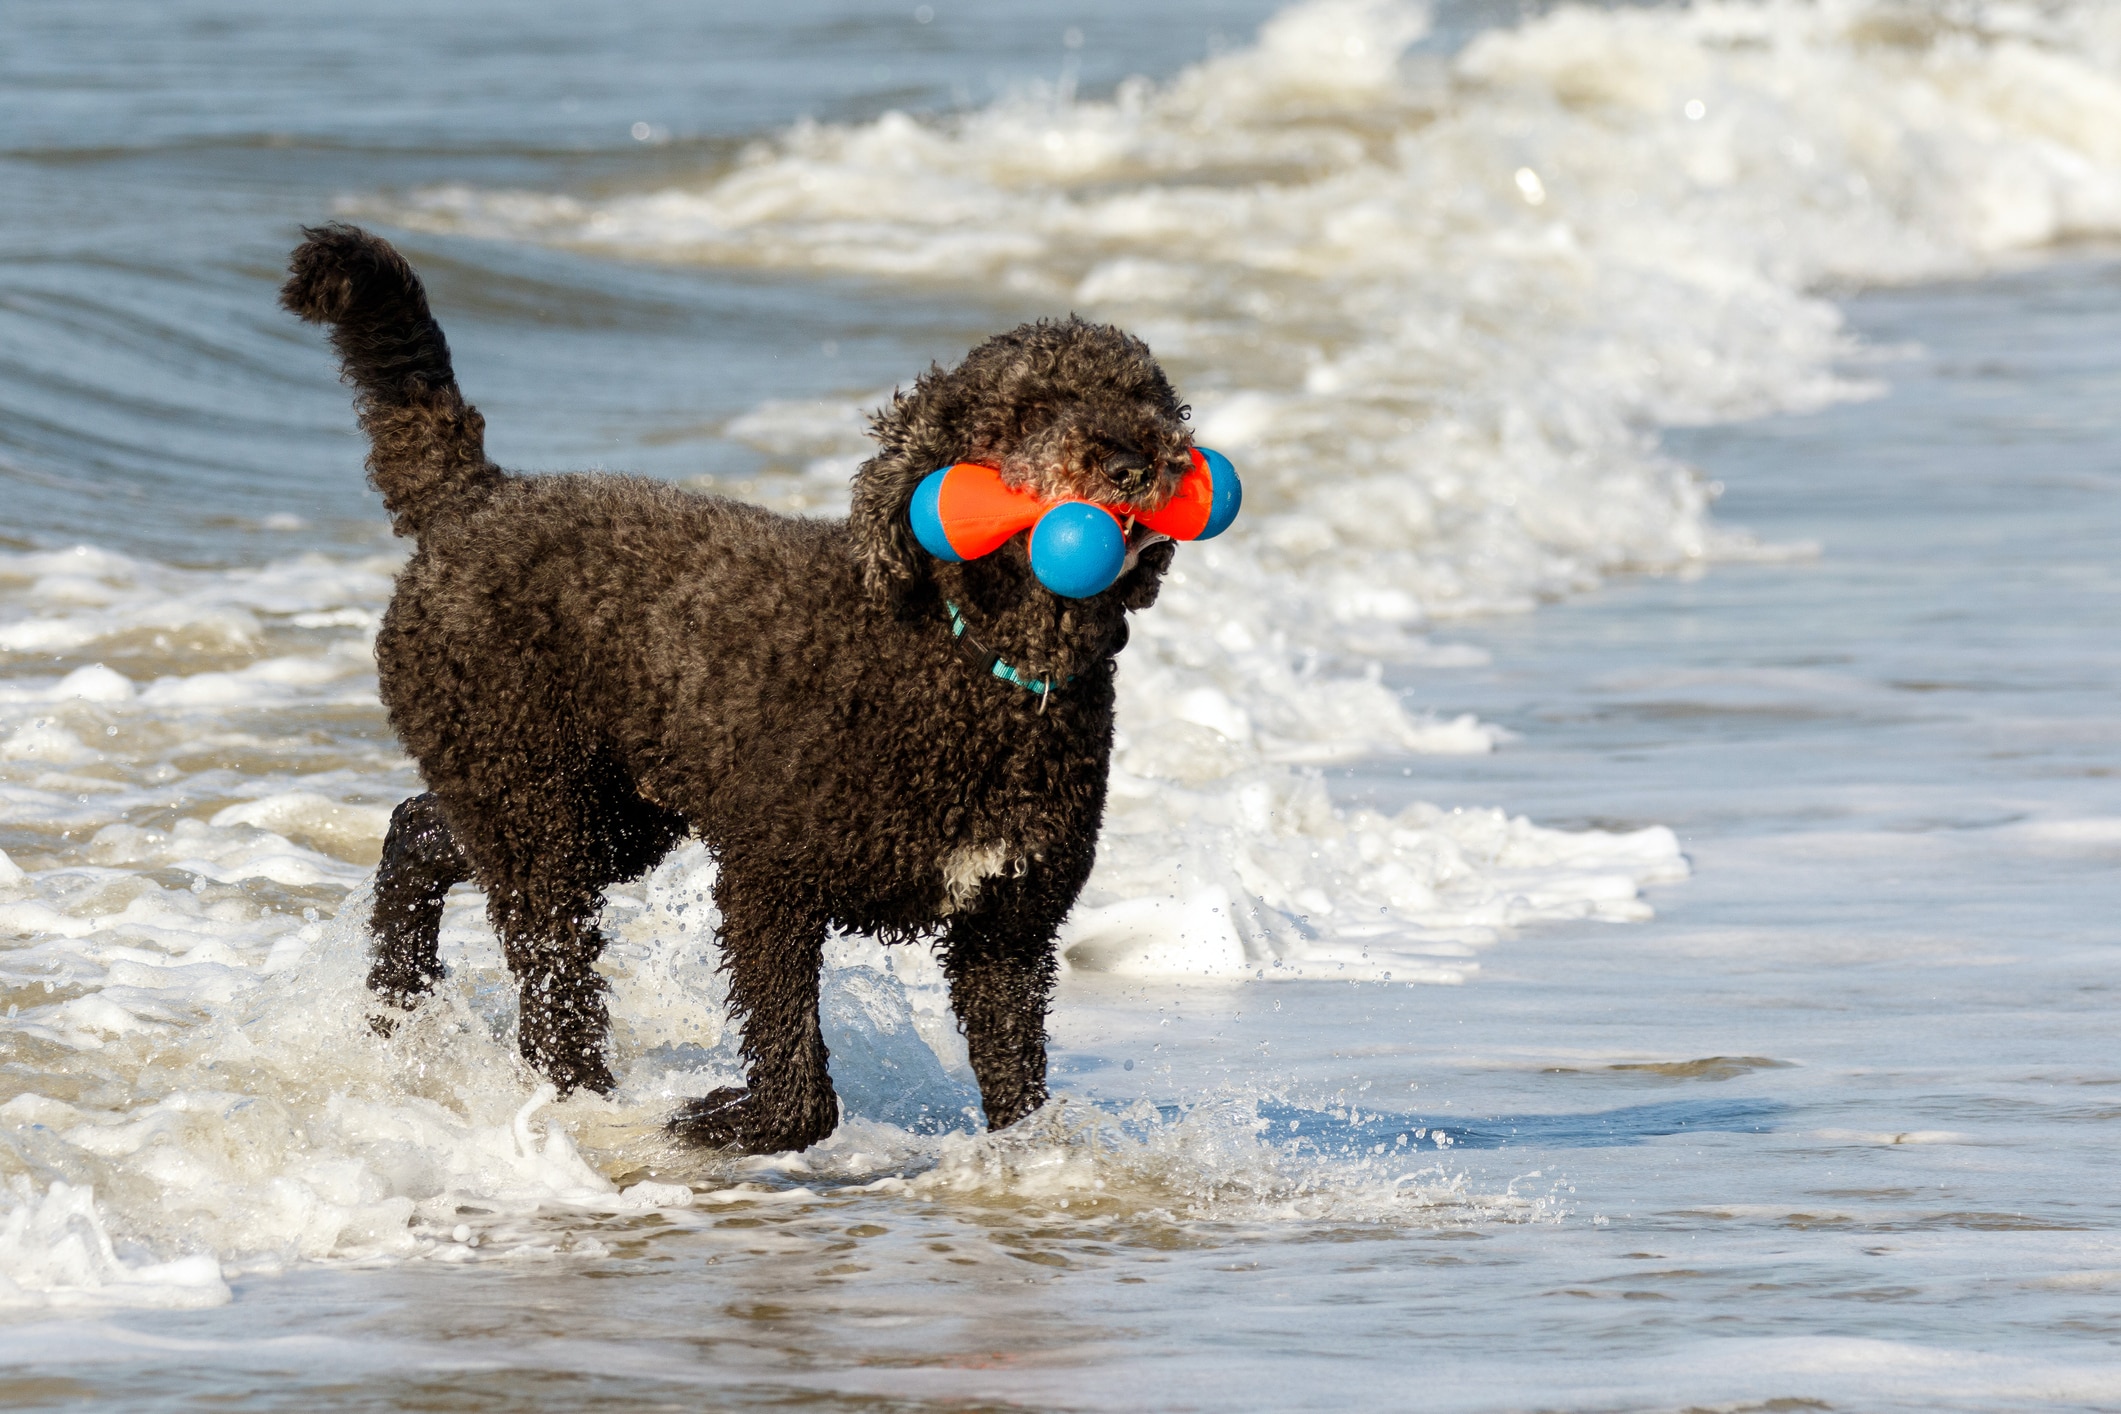 Black standard poodle dog frolicking in the waves at the shore